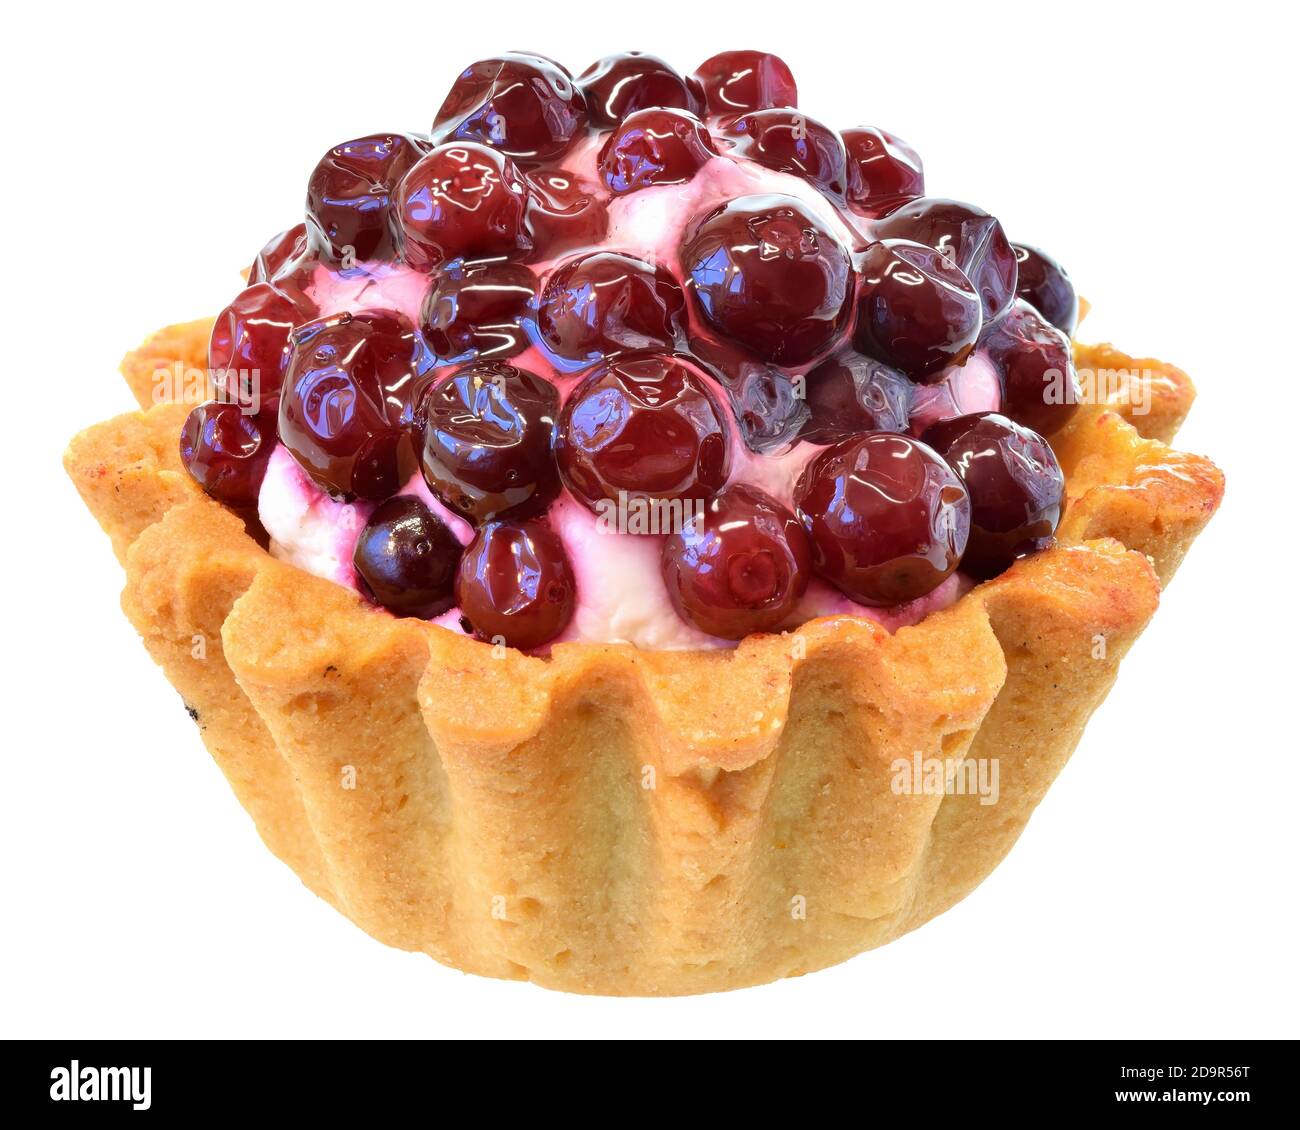 Tartlet cake with cream and cranberries isolated on a white background. Stock Photo